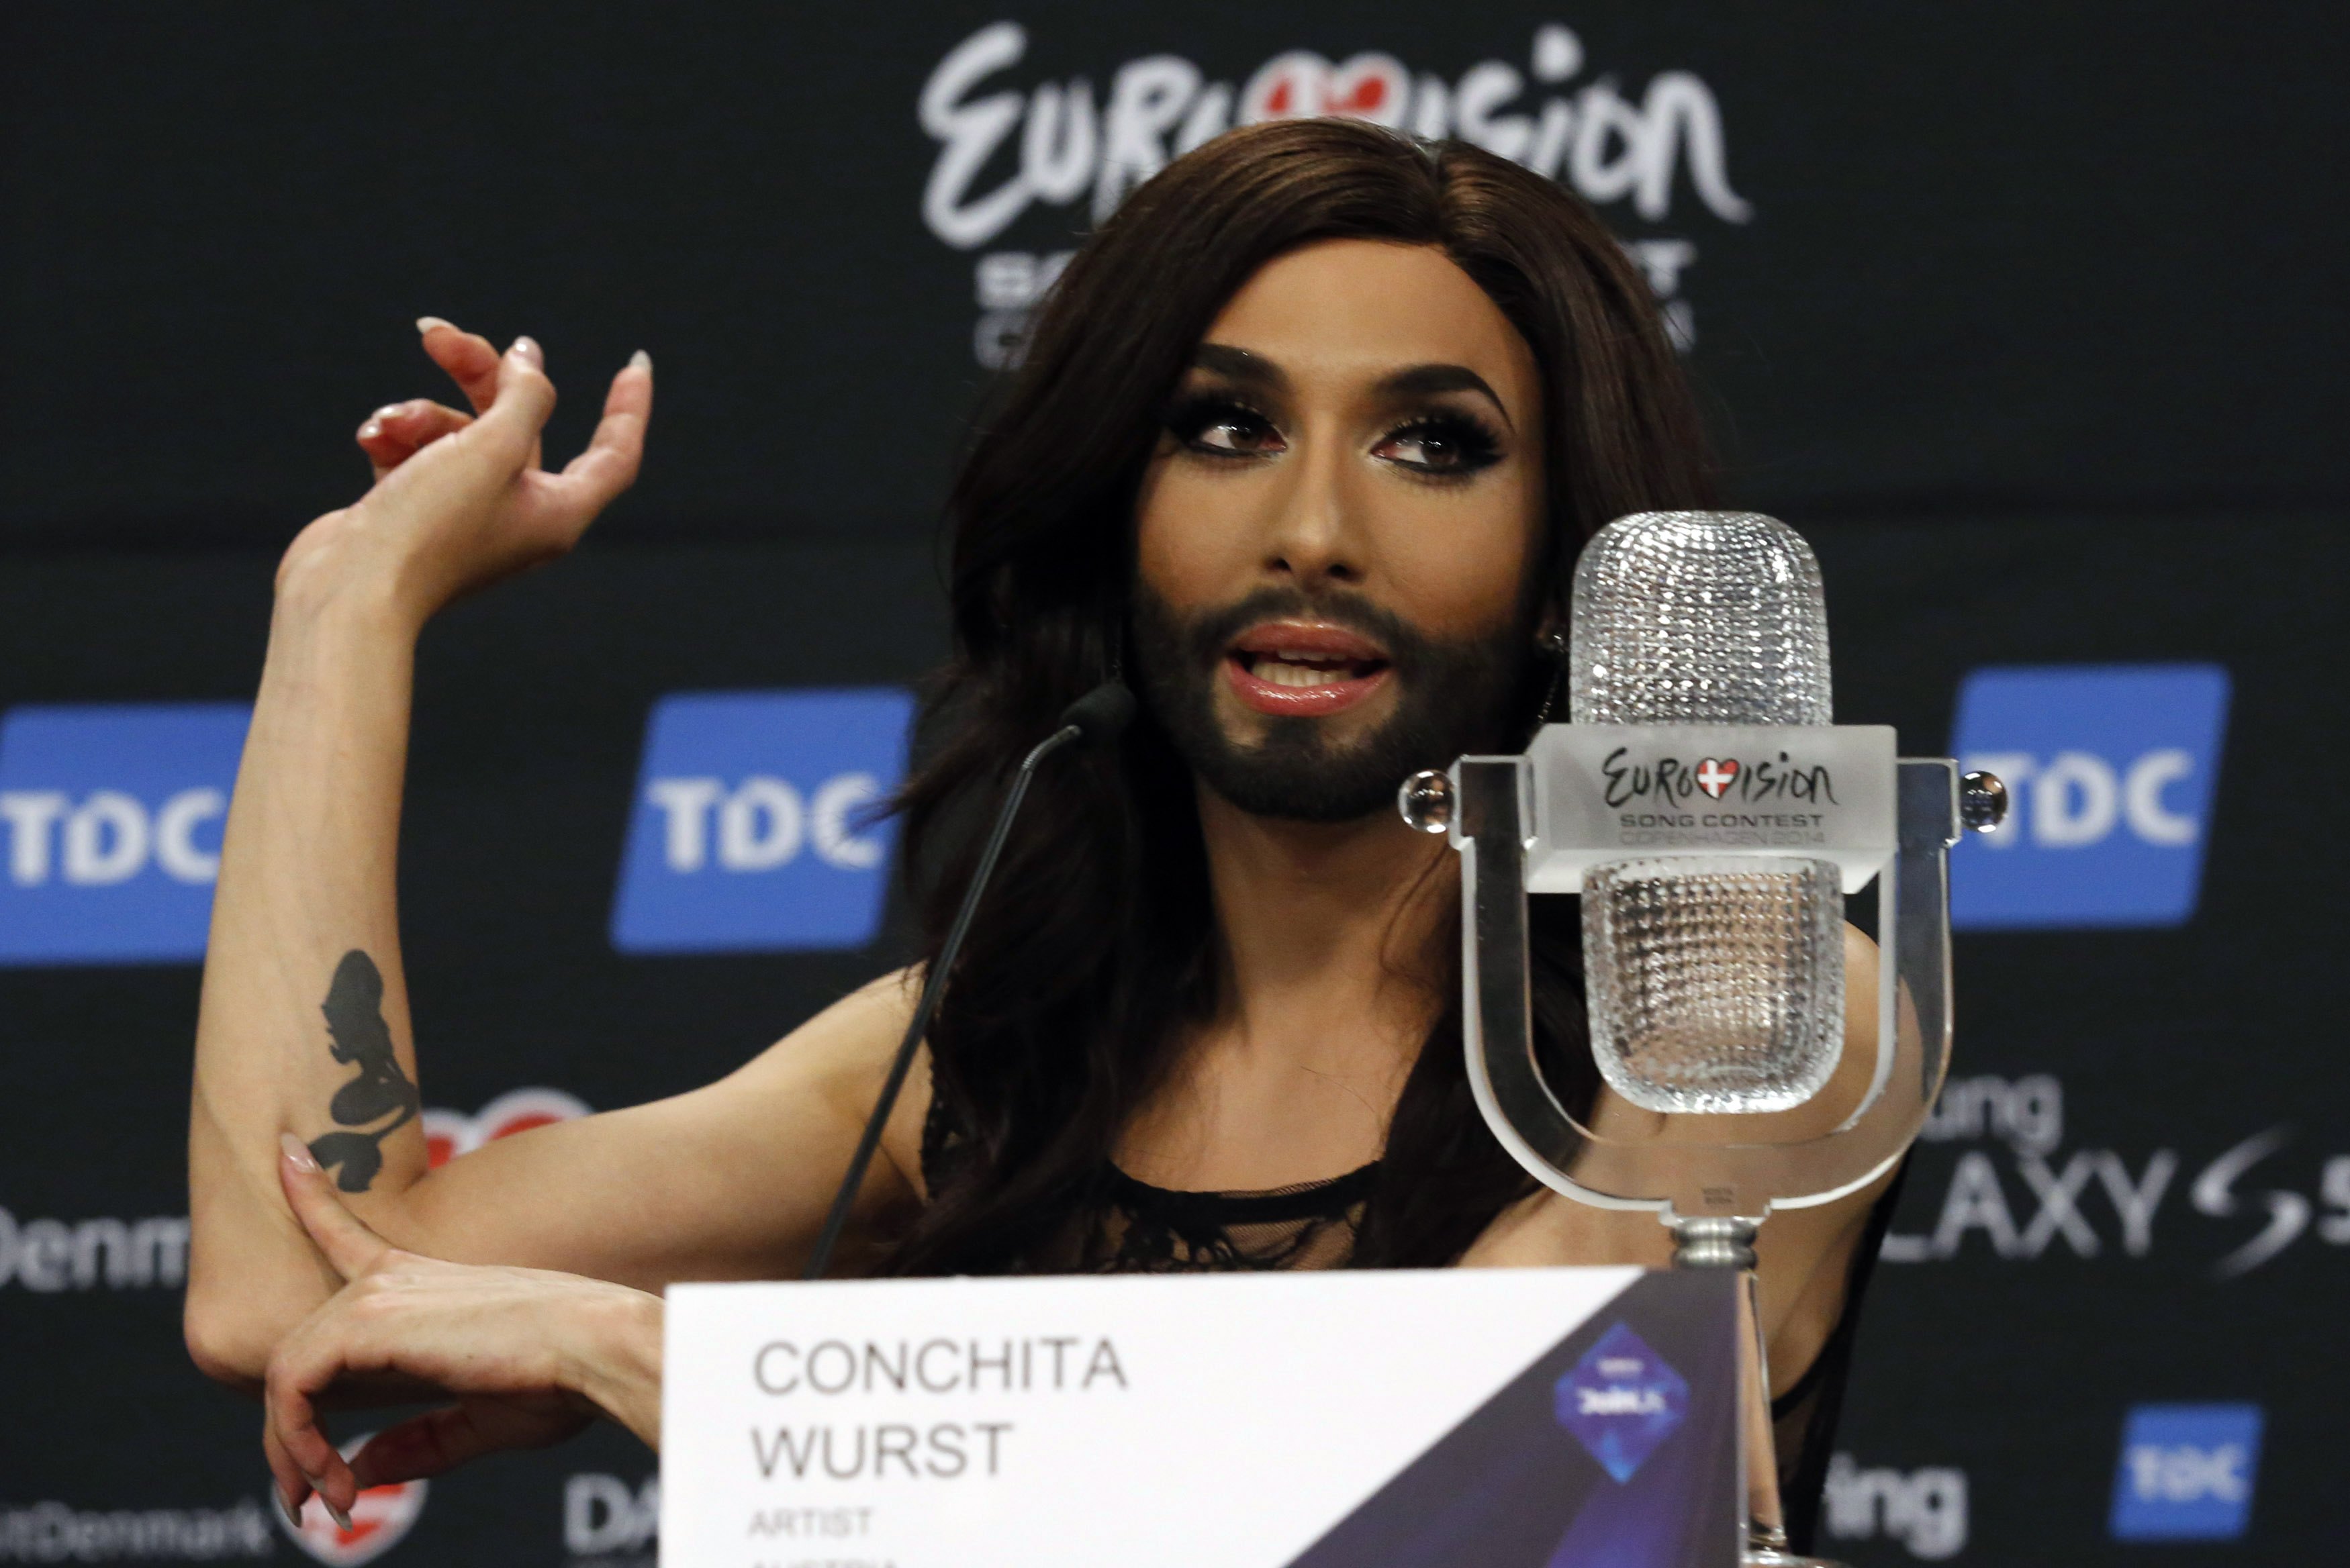 Austrian drag queen Conchita Wurst addresses a news conference after